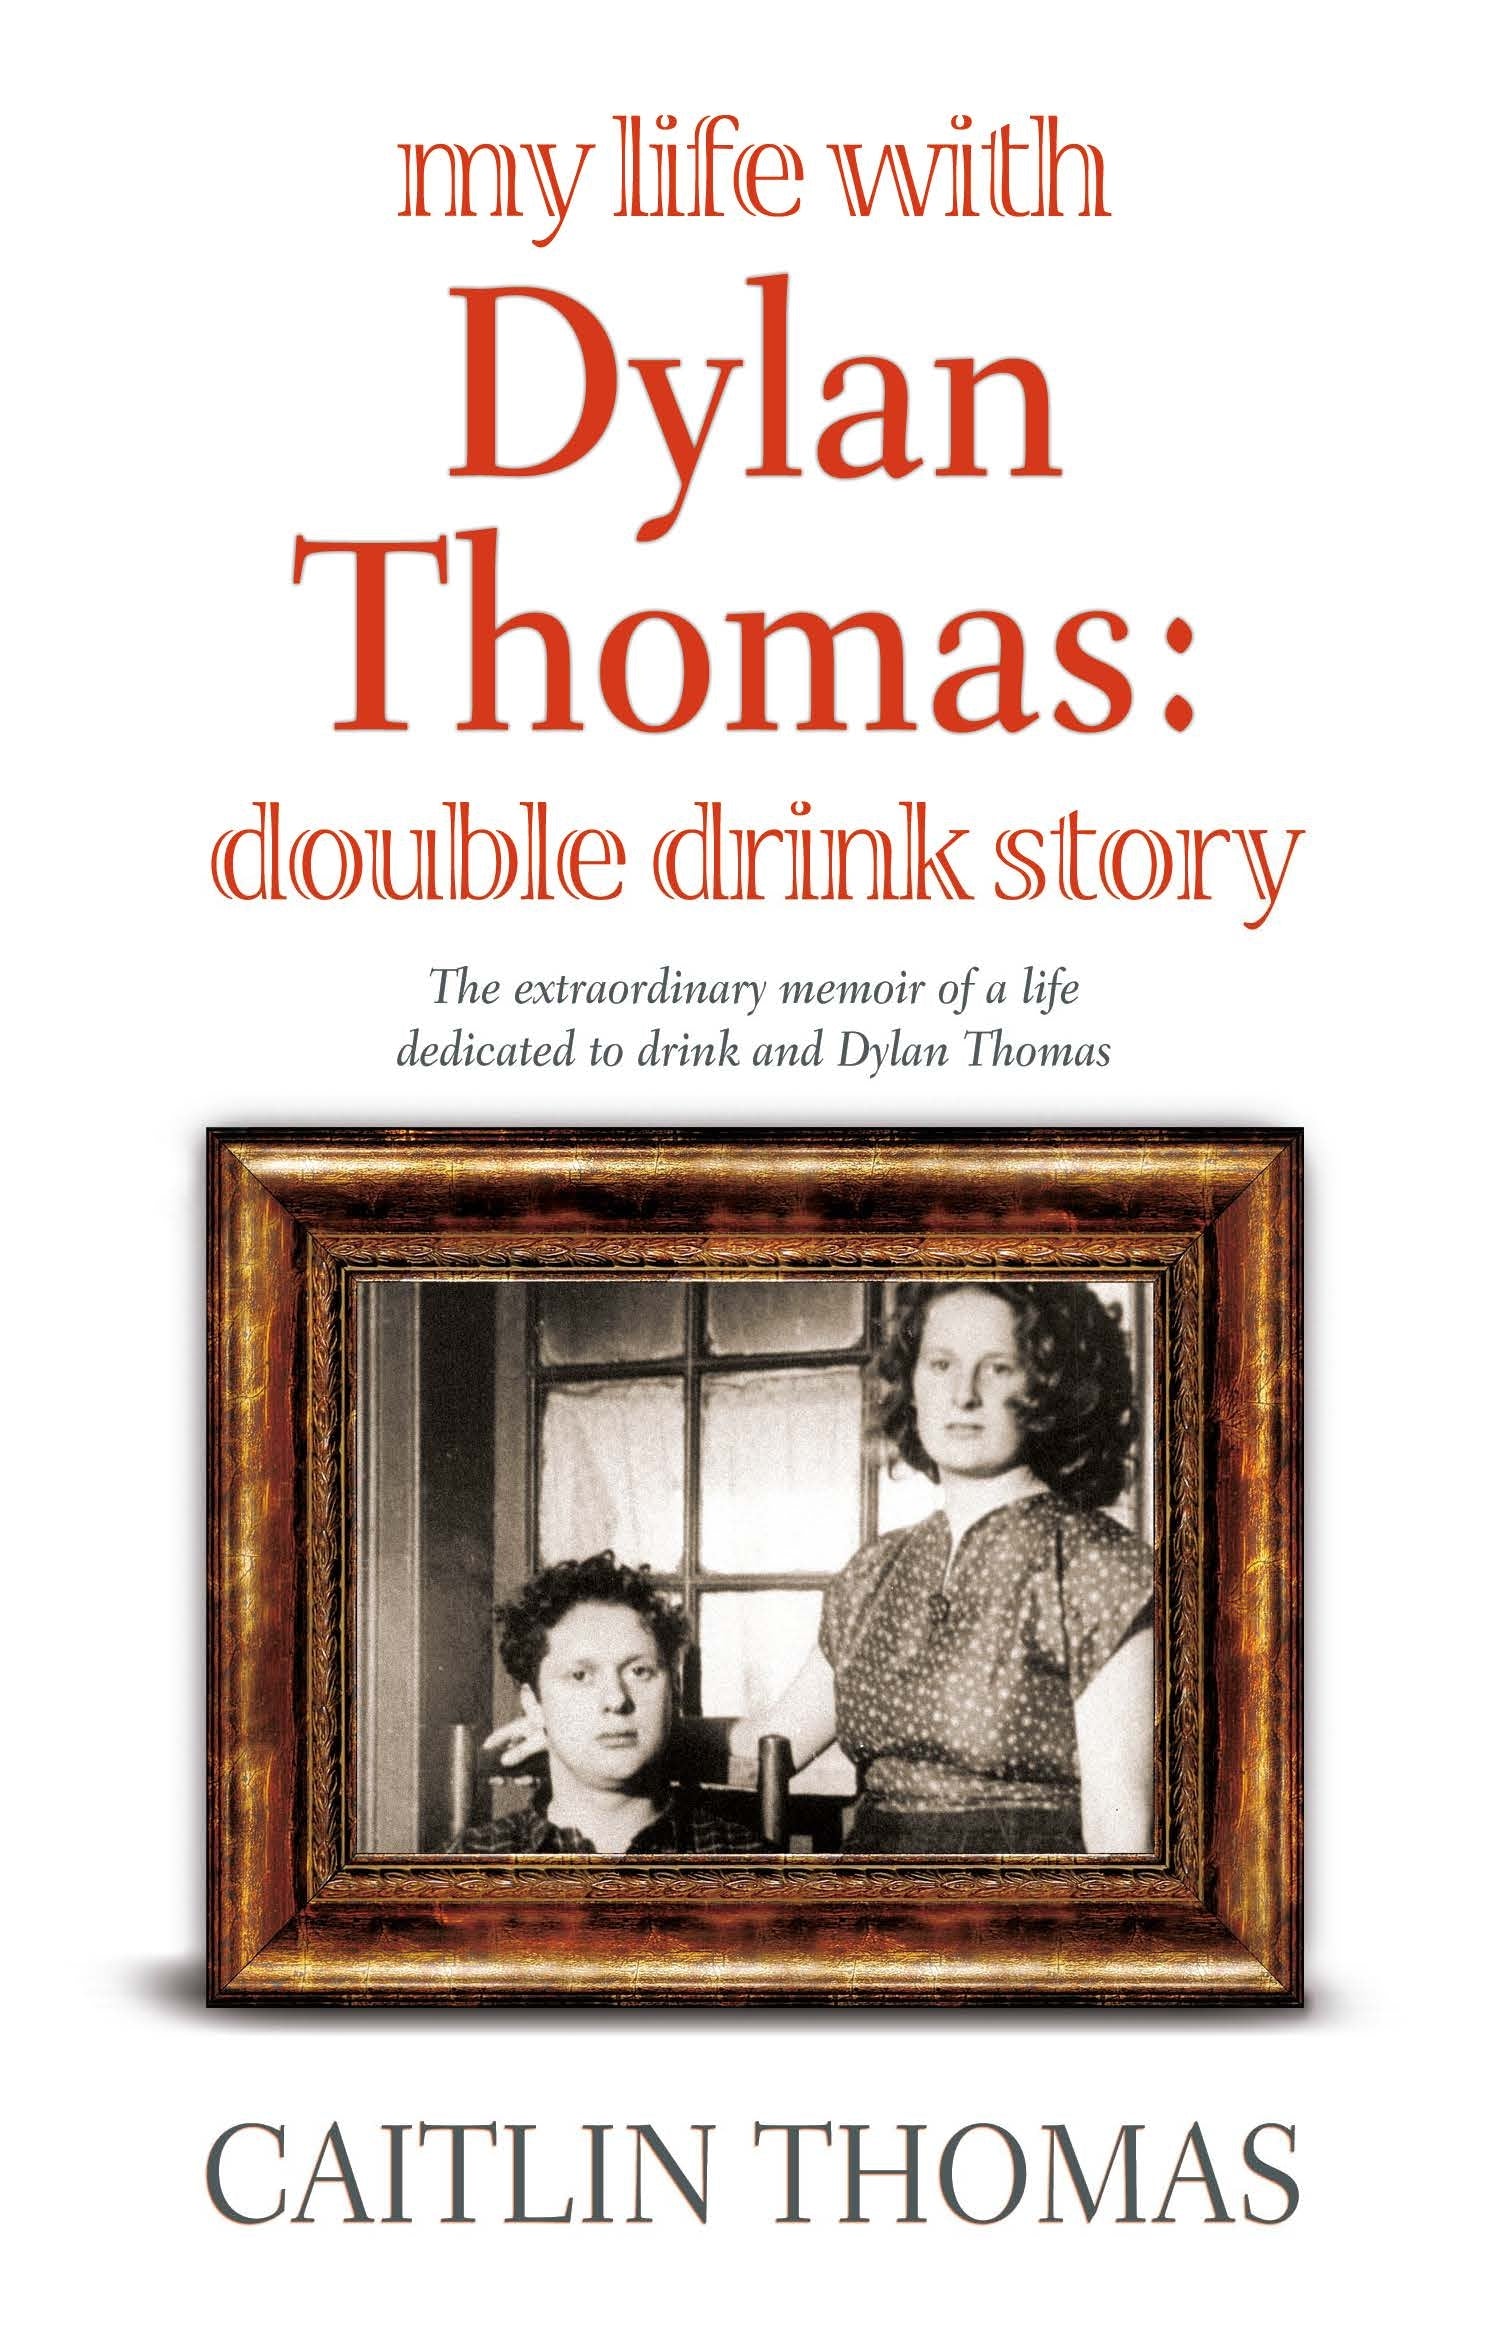 My Life With Dylan Thomas by Caitlin Thomas